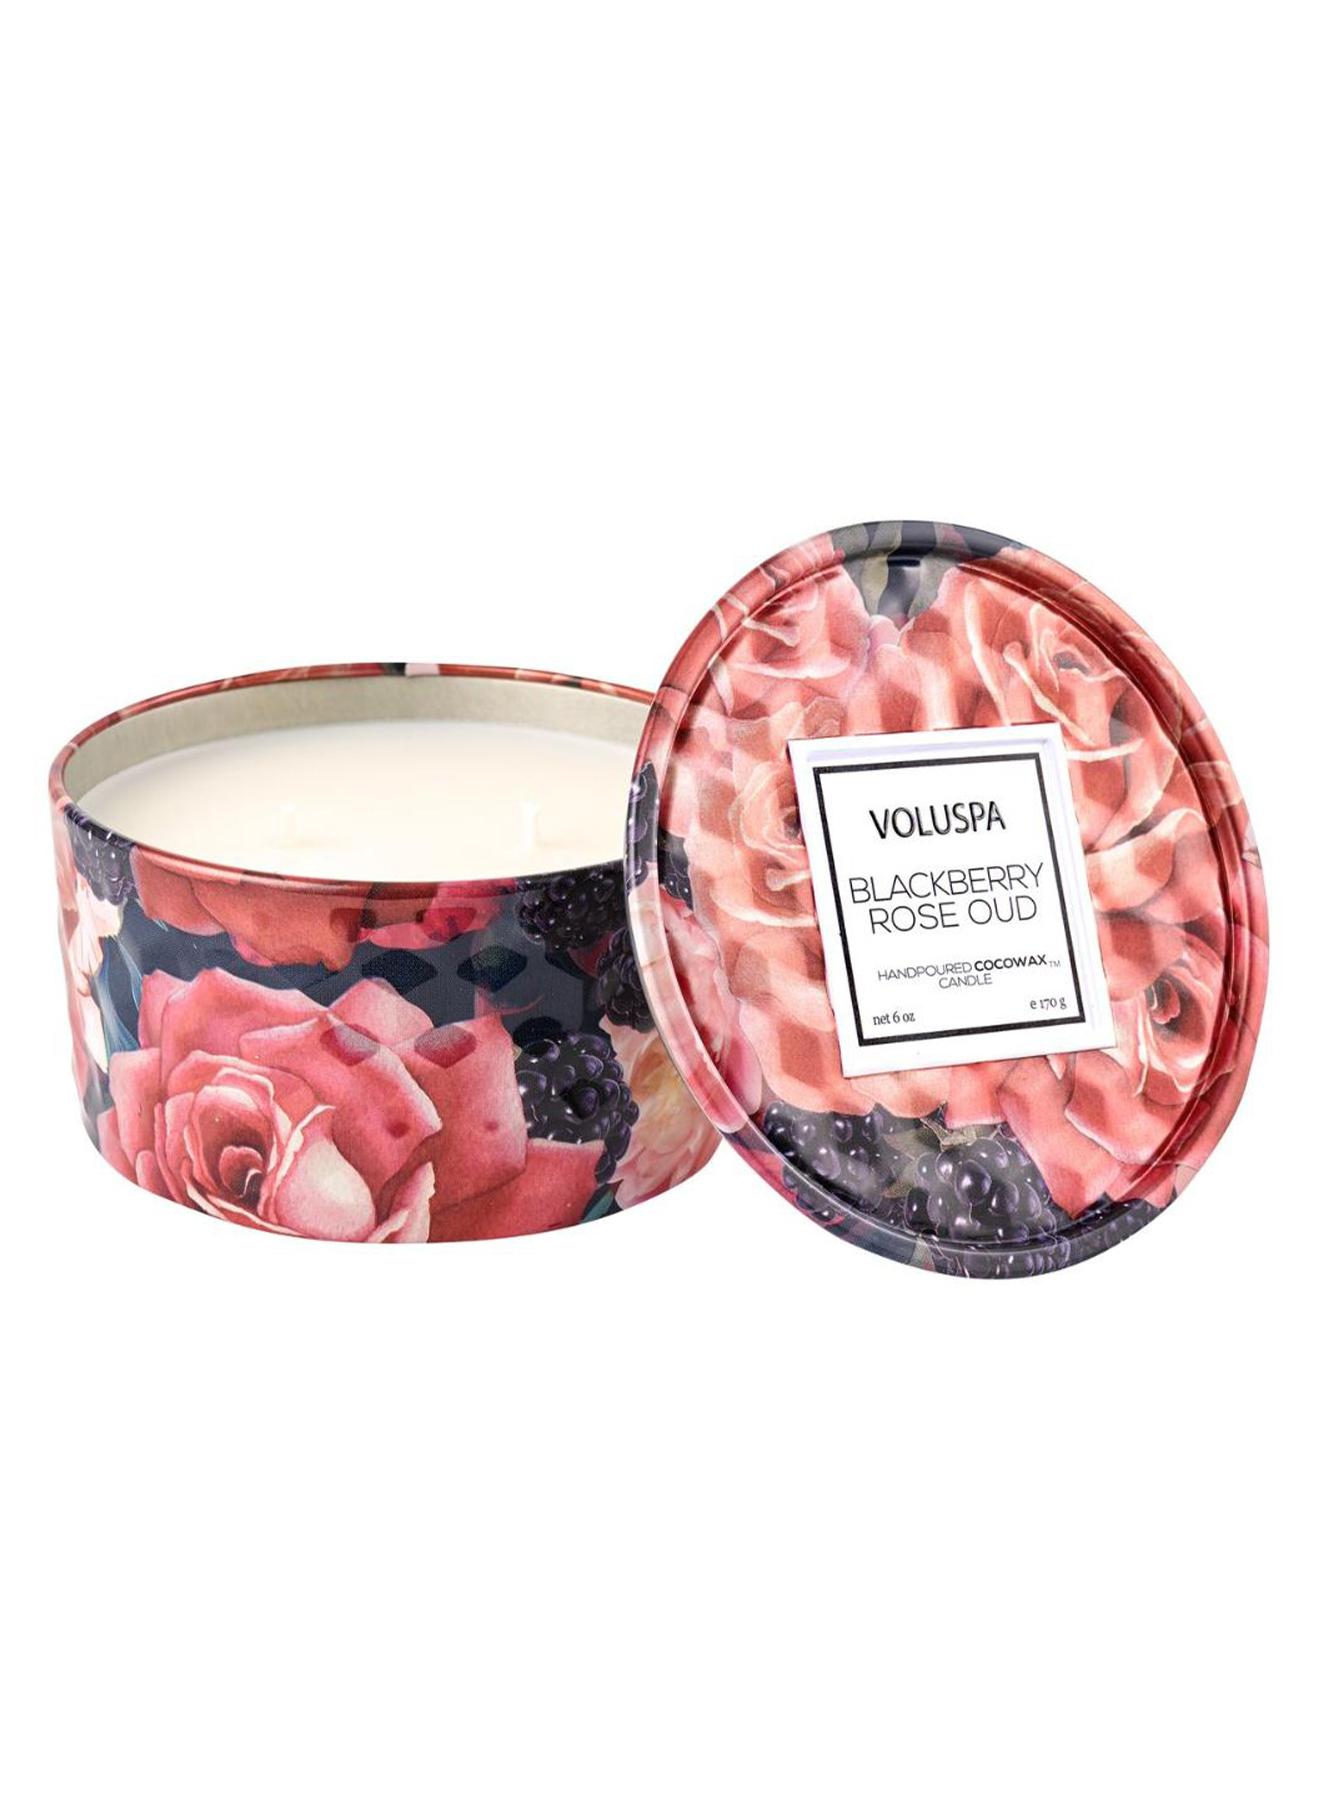 Blackberry rose oud 2 wick tin candle - 1